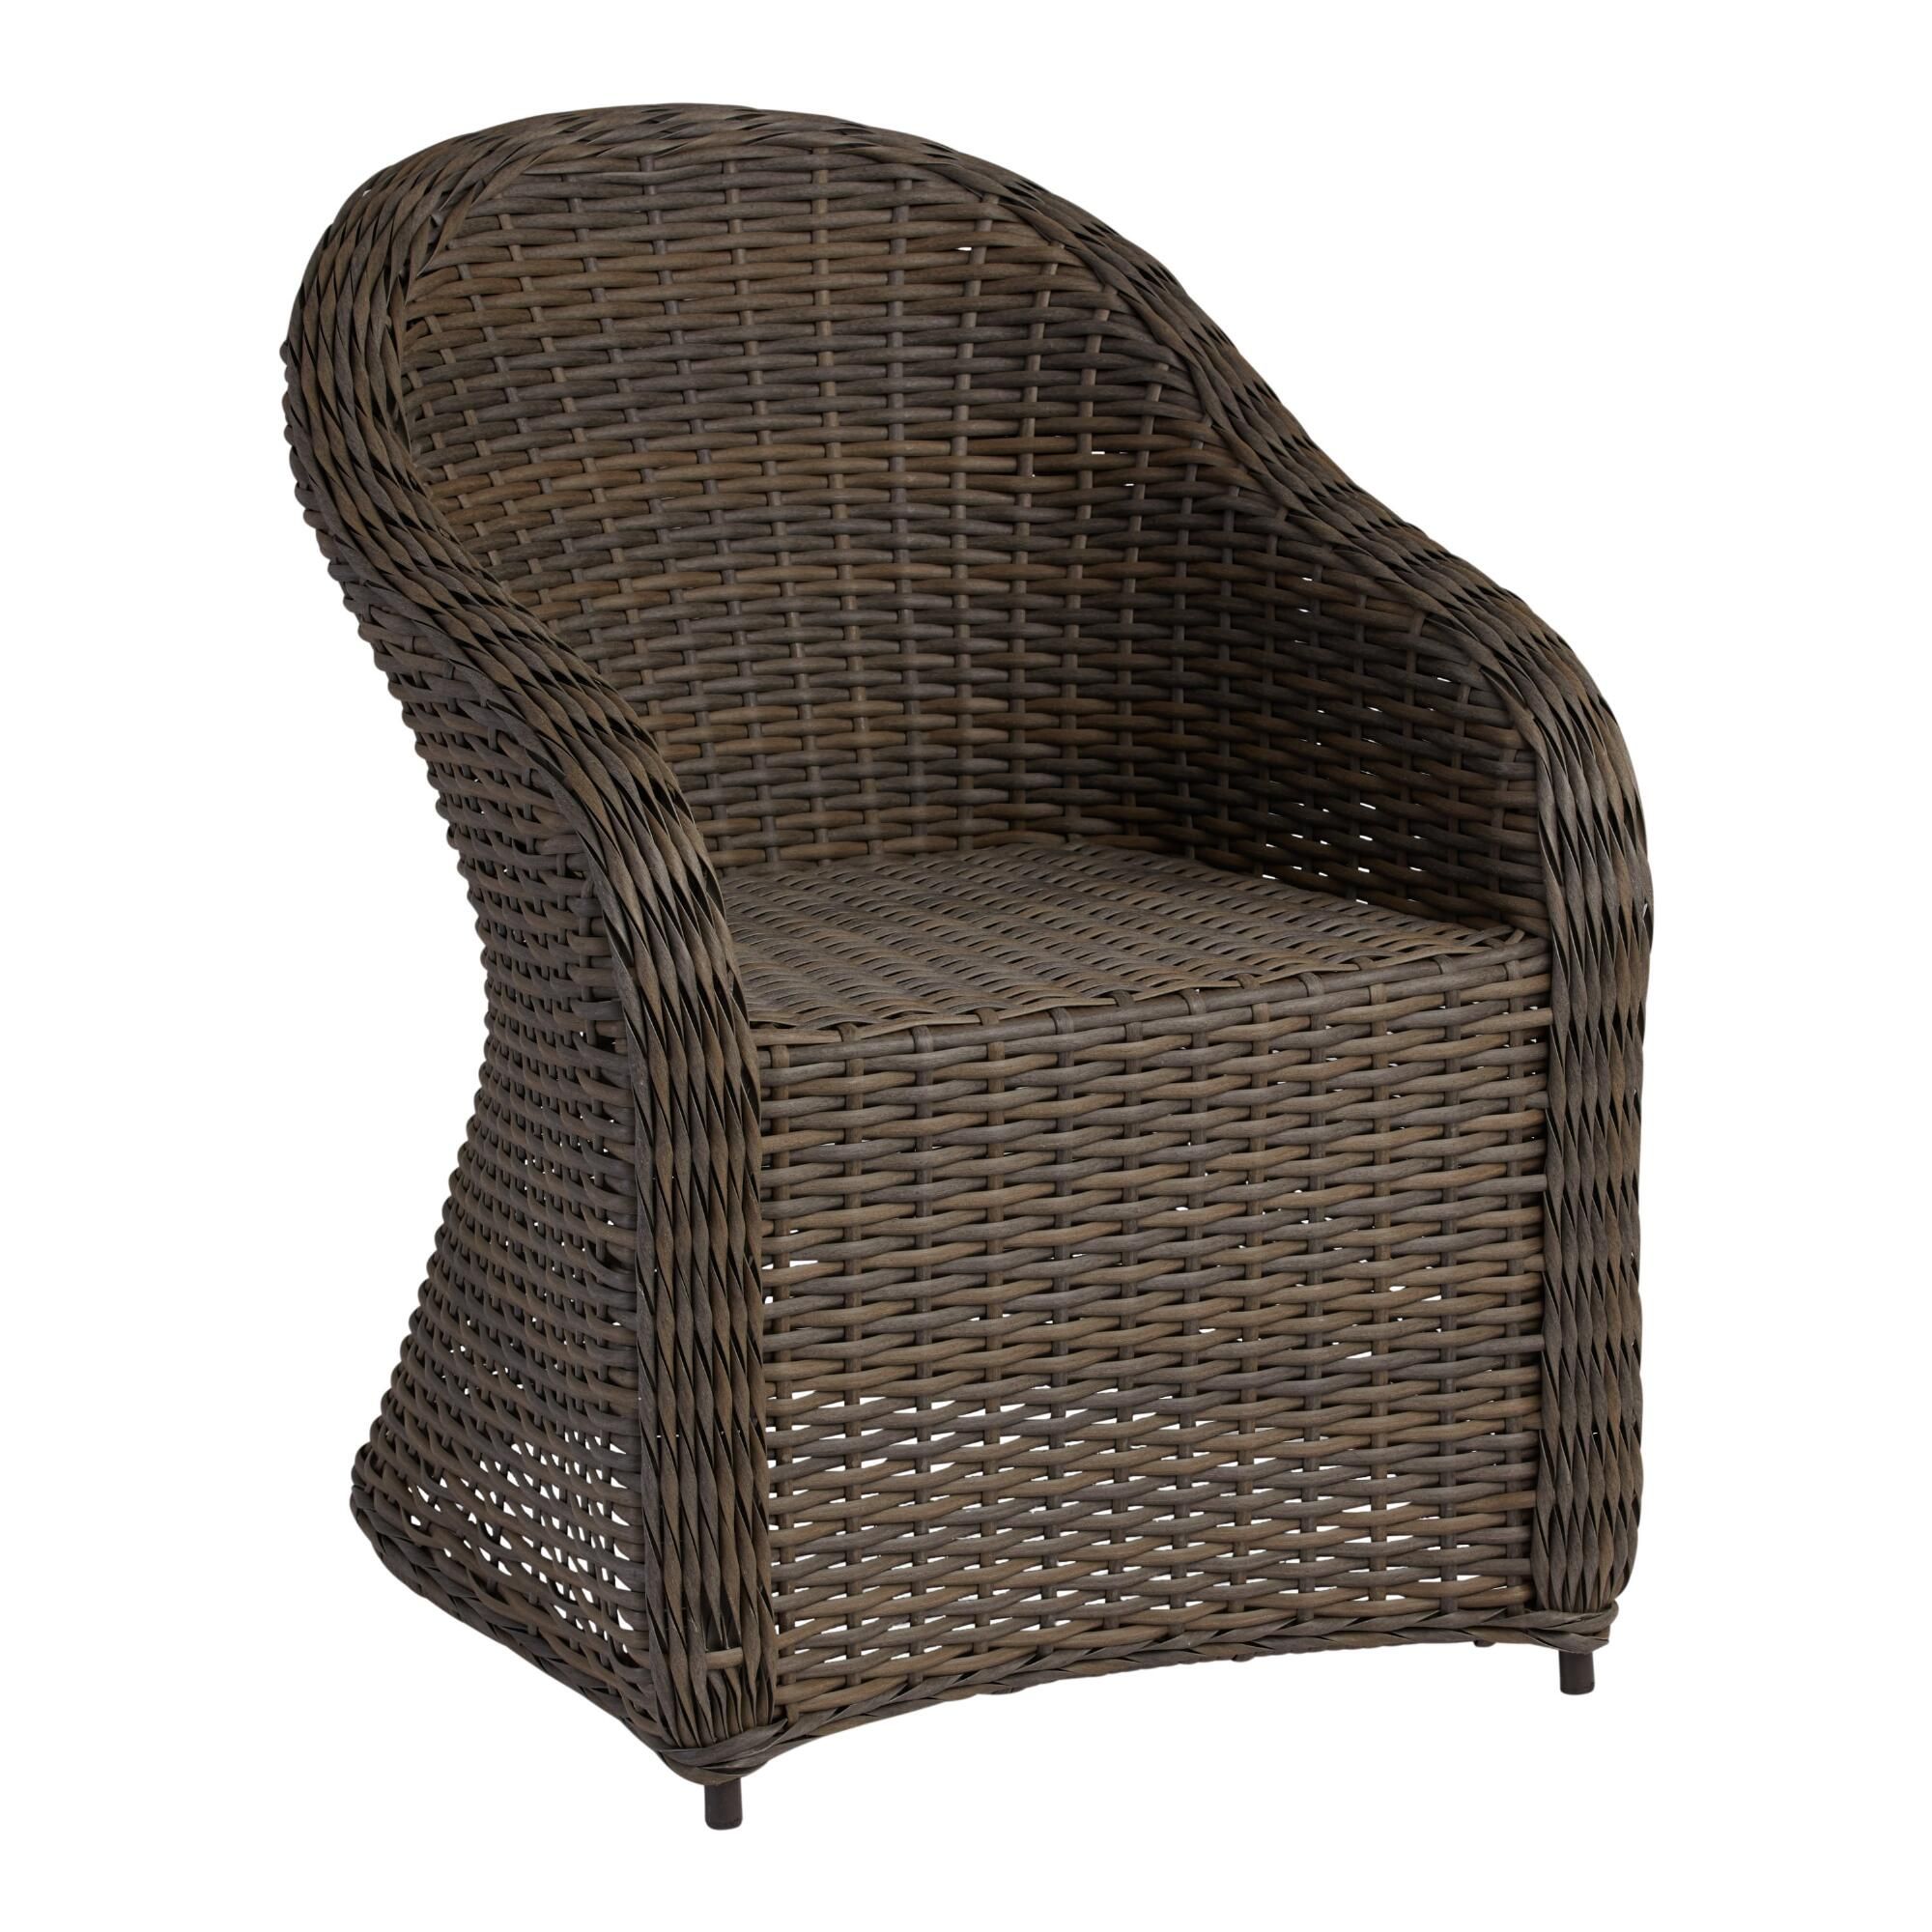 Capistrano All Weather Wicker Armchair: Brown - Resin by World Market | World Market